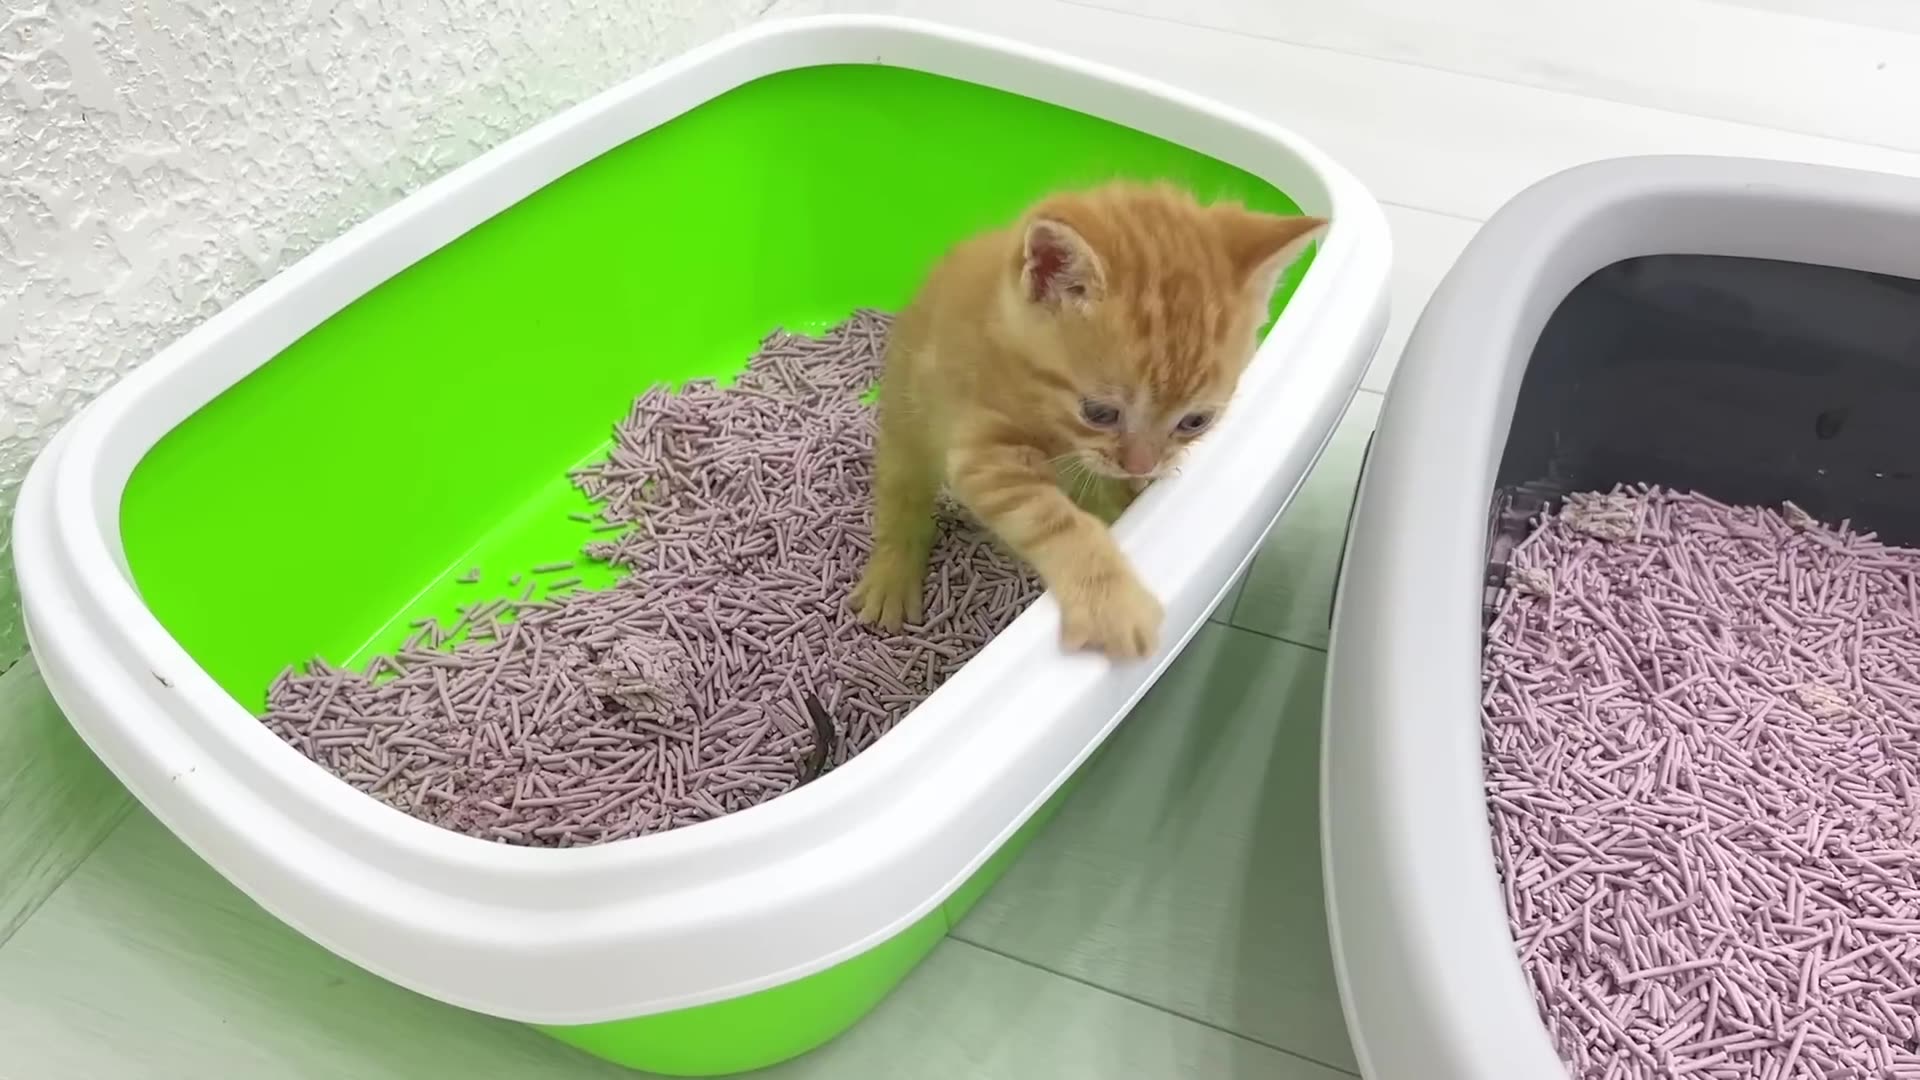 How little kittens learn to go to the litter box